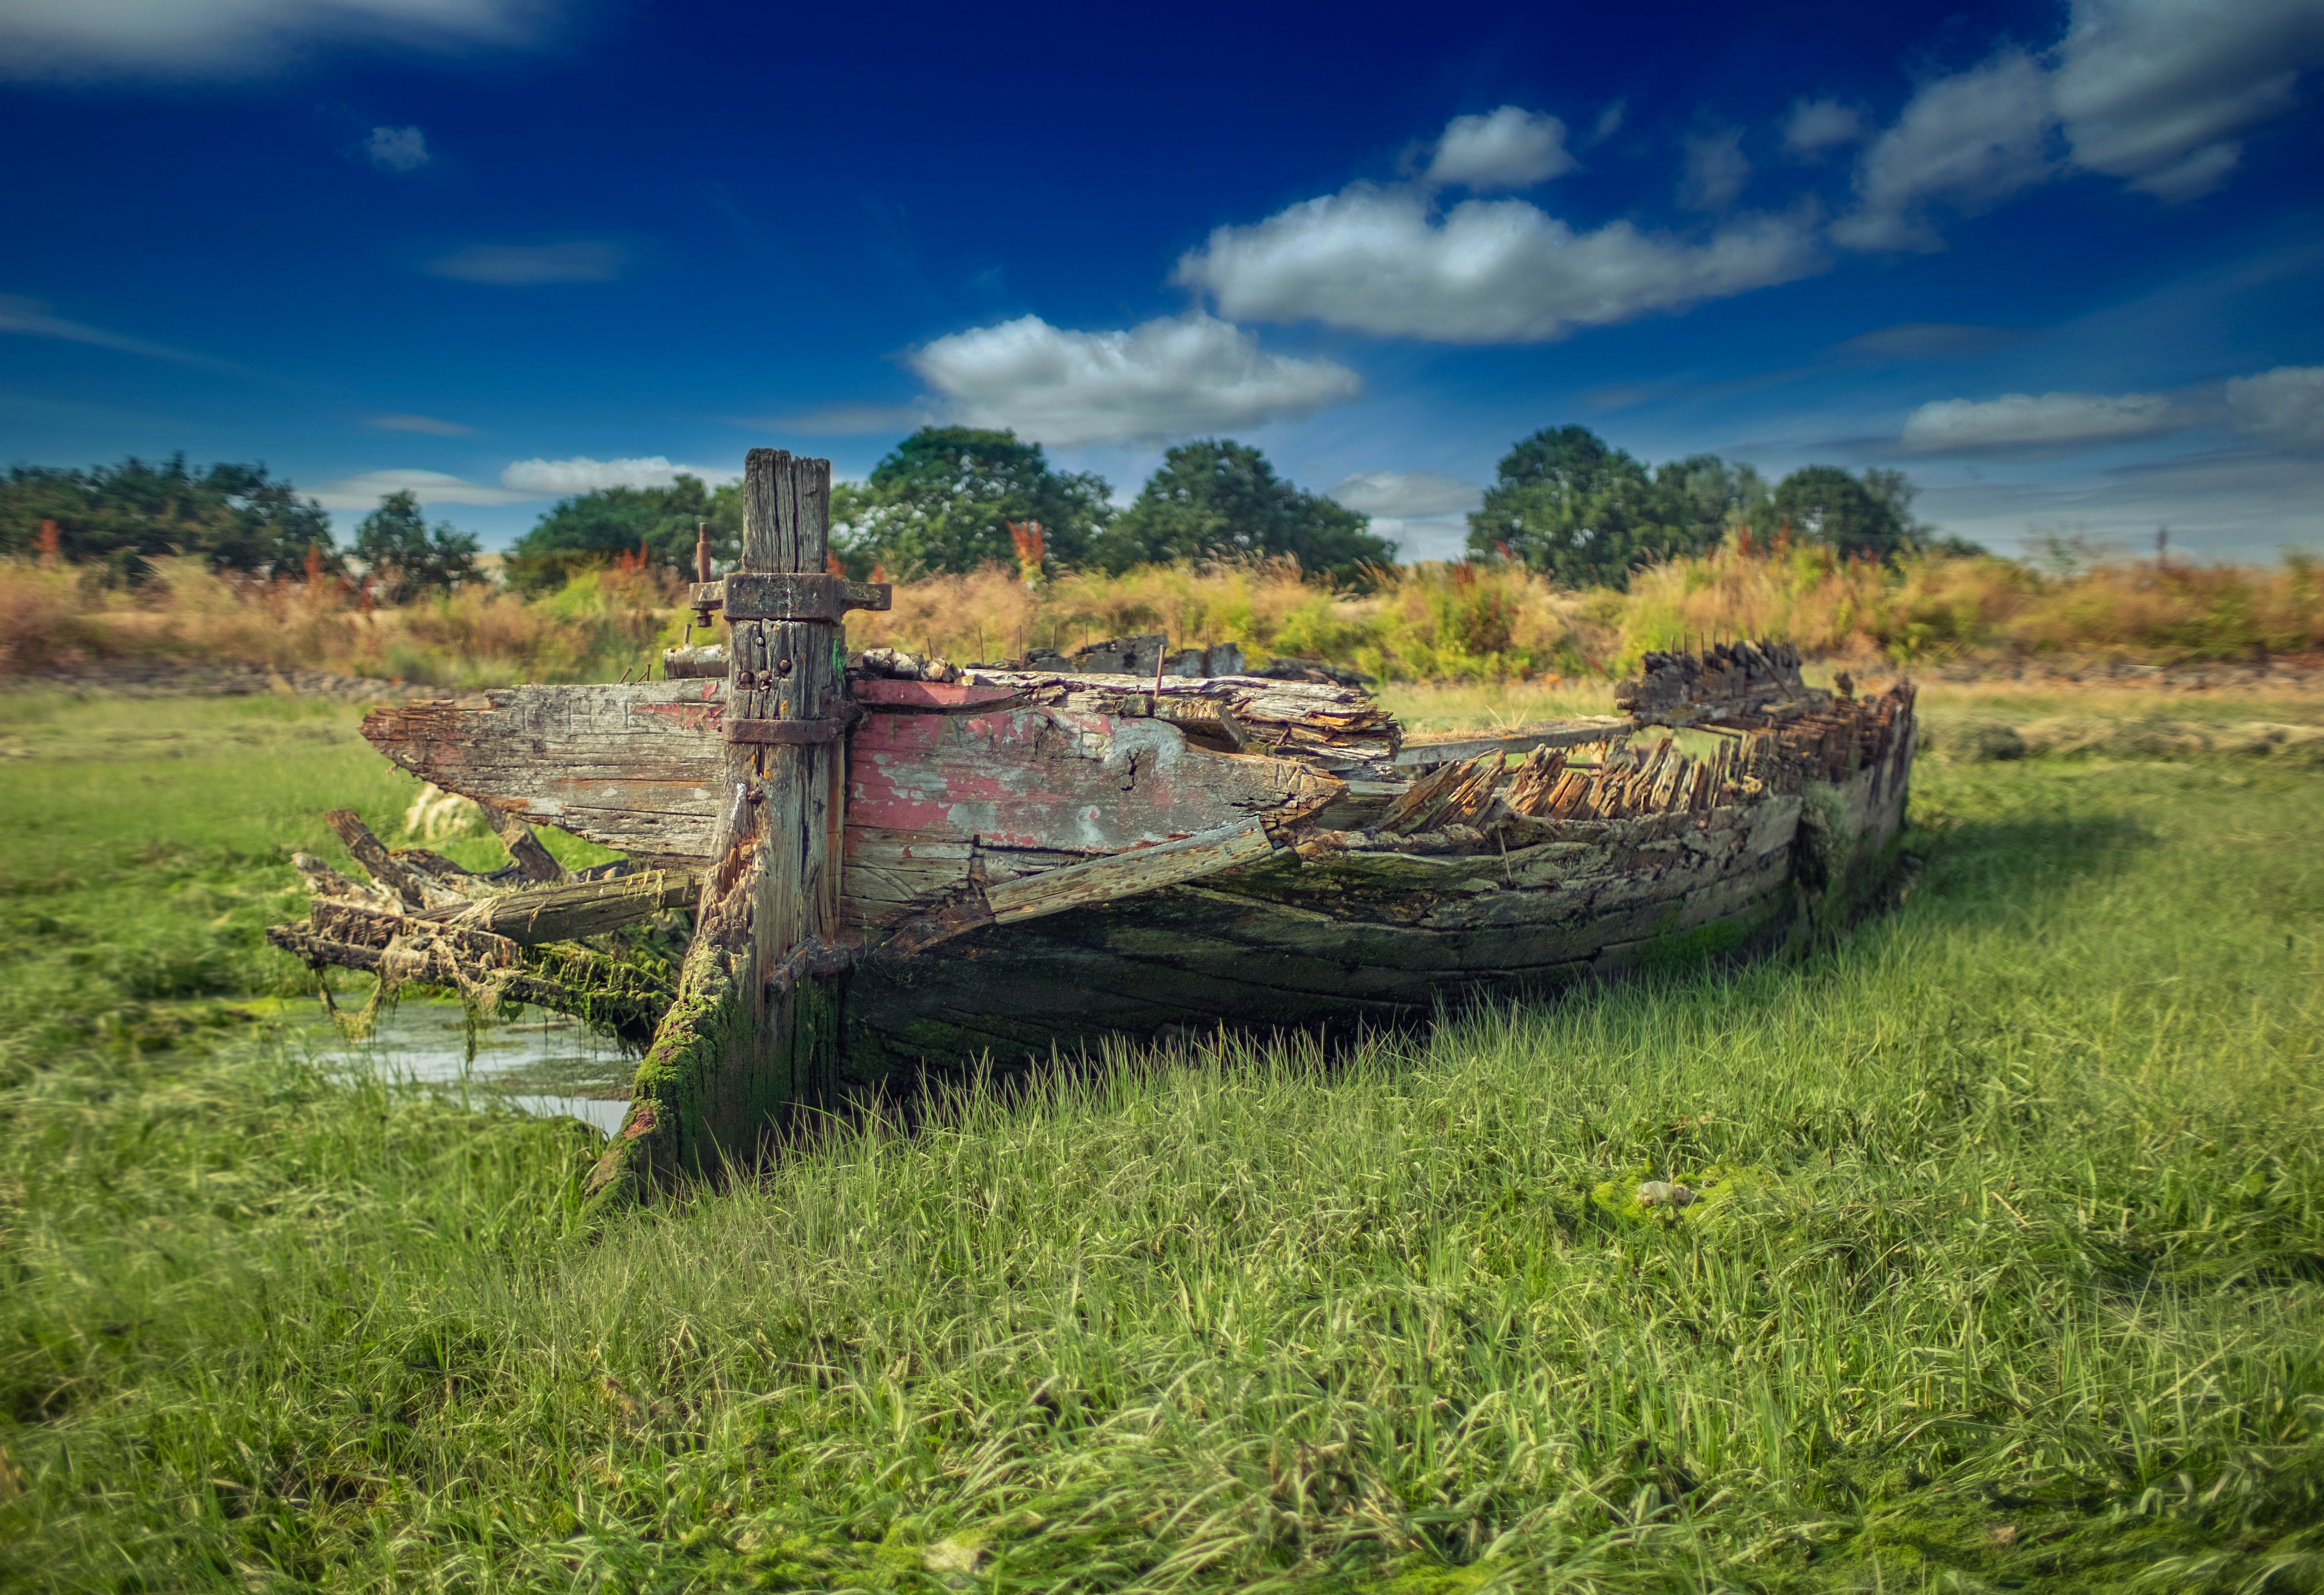 wrecked wooden boat on grass